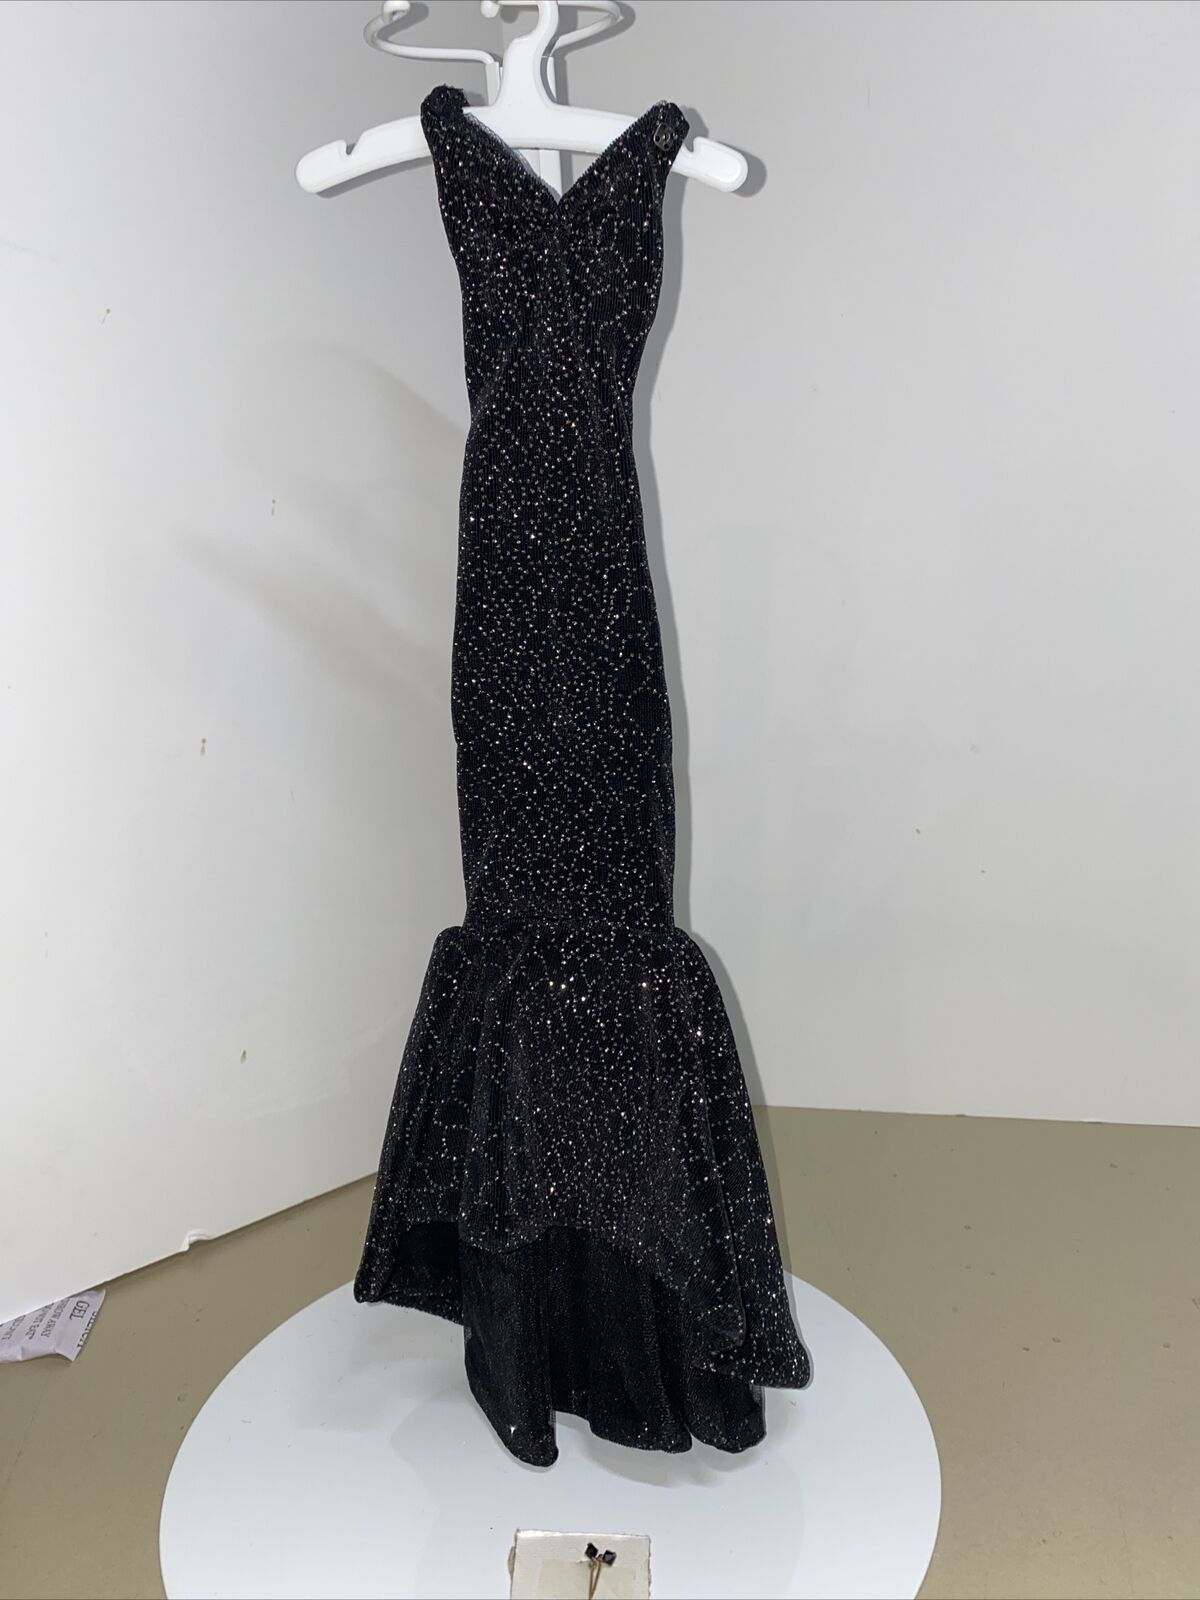 16” Tonner Tyler Wentworth  Fao Exclusive All That Glitters Doll Black Long Gown